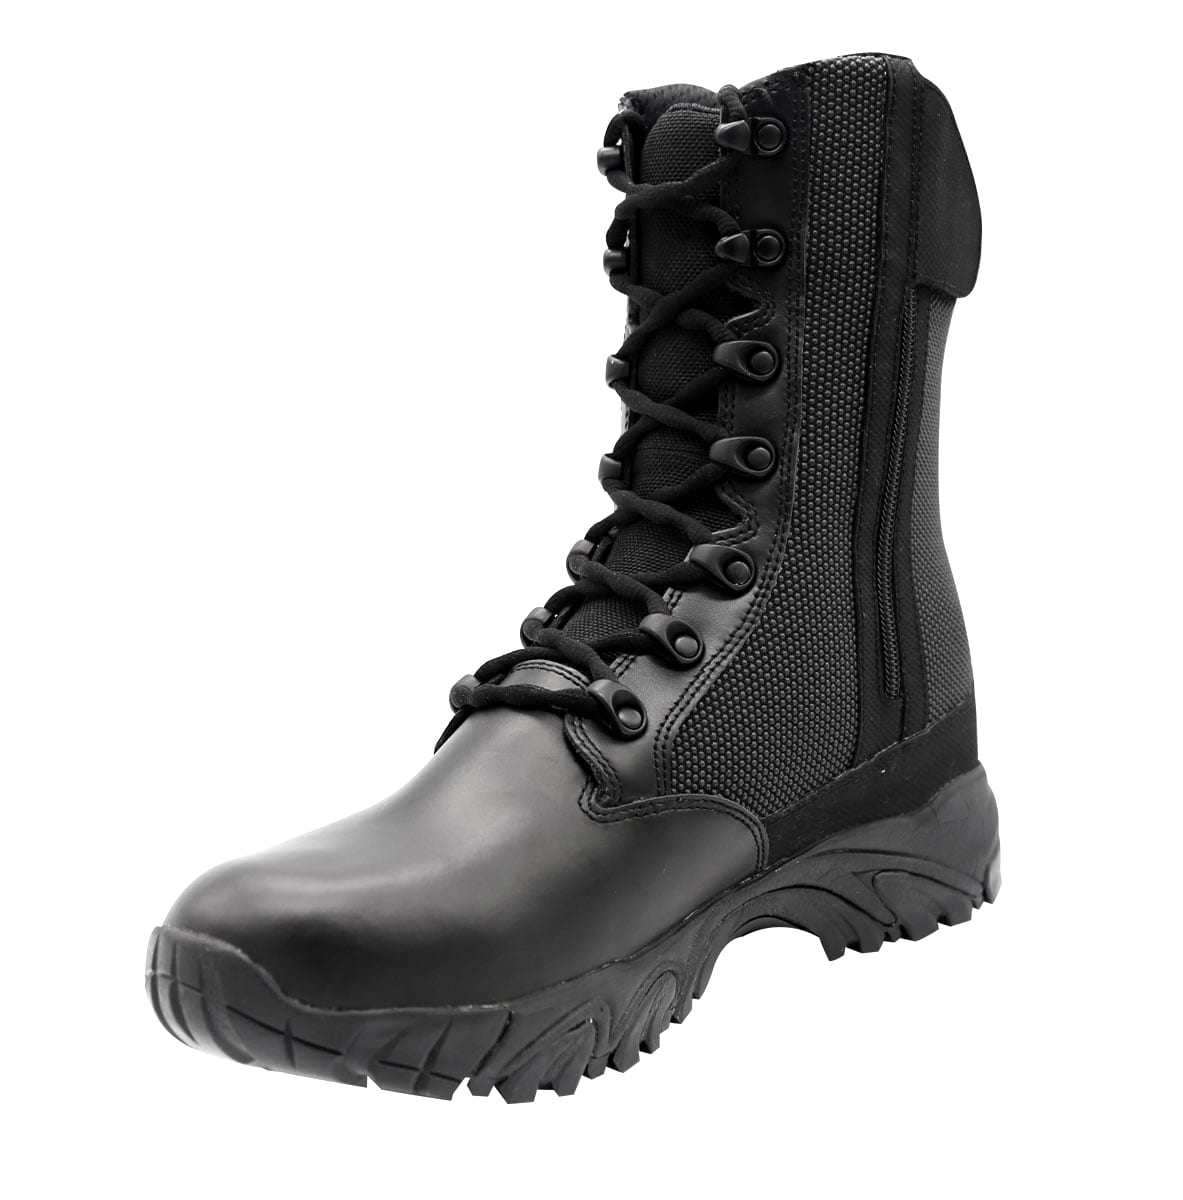 Pre-owned Tactical Boots Hiking Black Boots Motorcycle Combat Airsoft For  Mens Zipper Boot